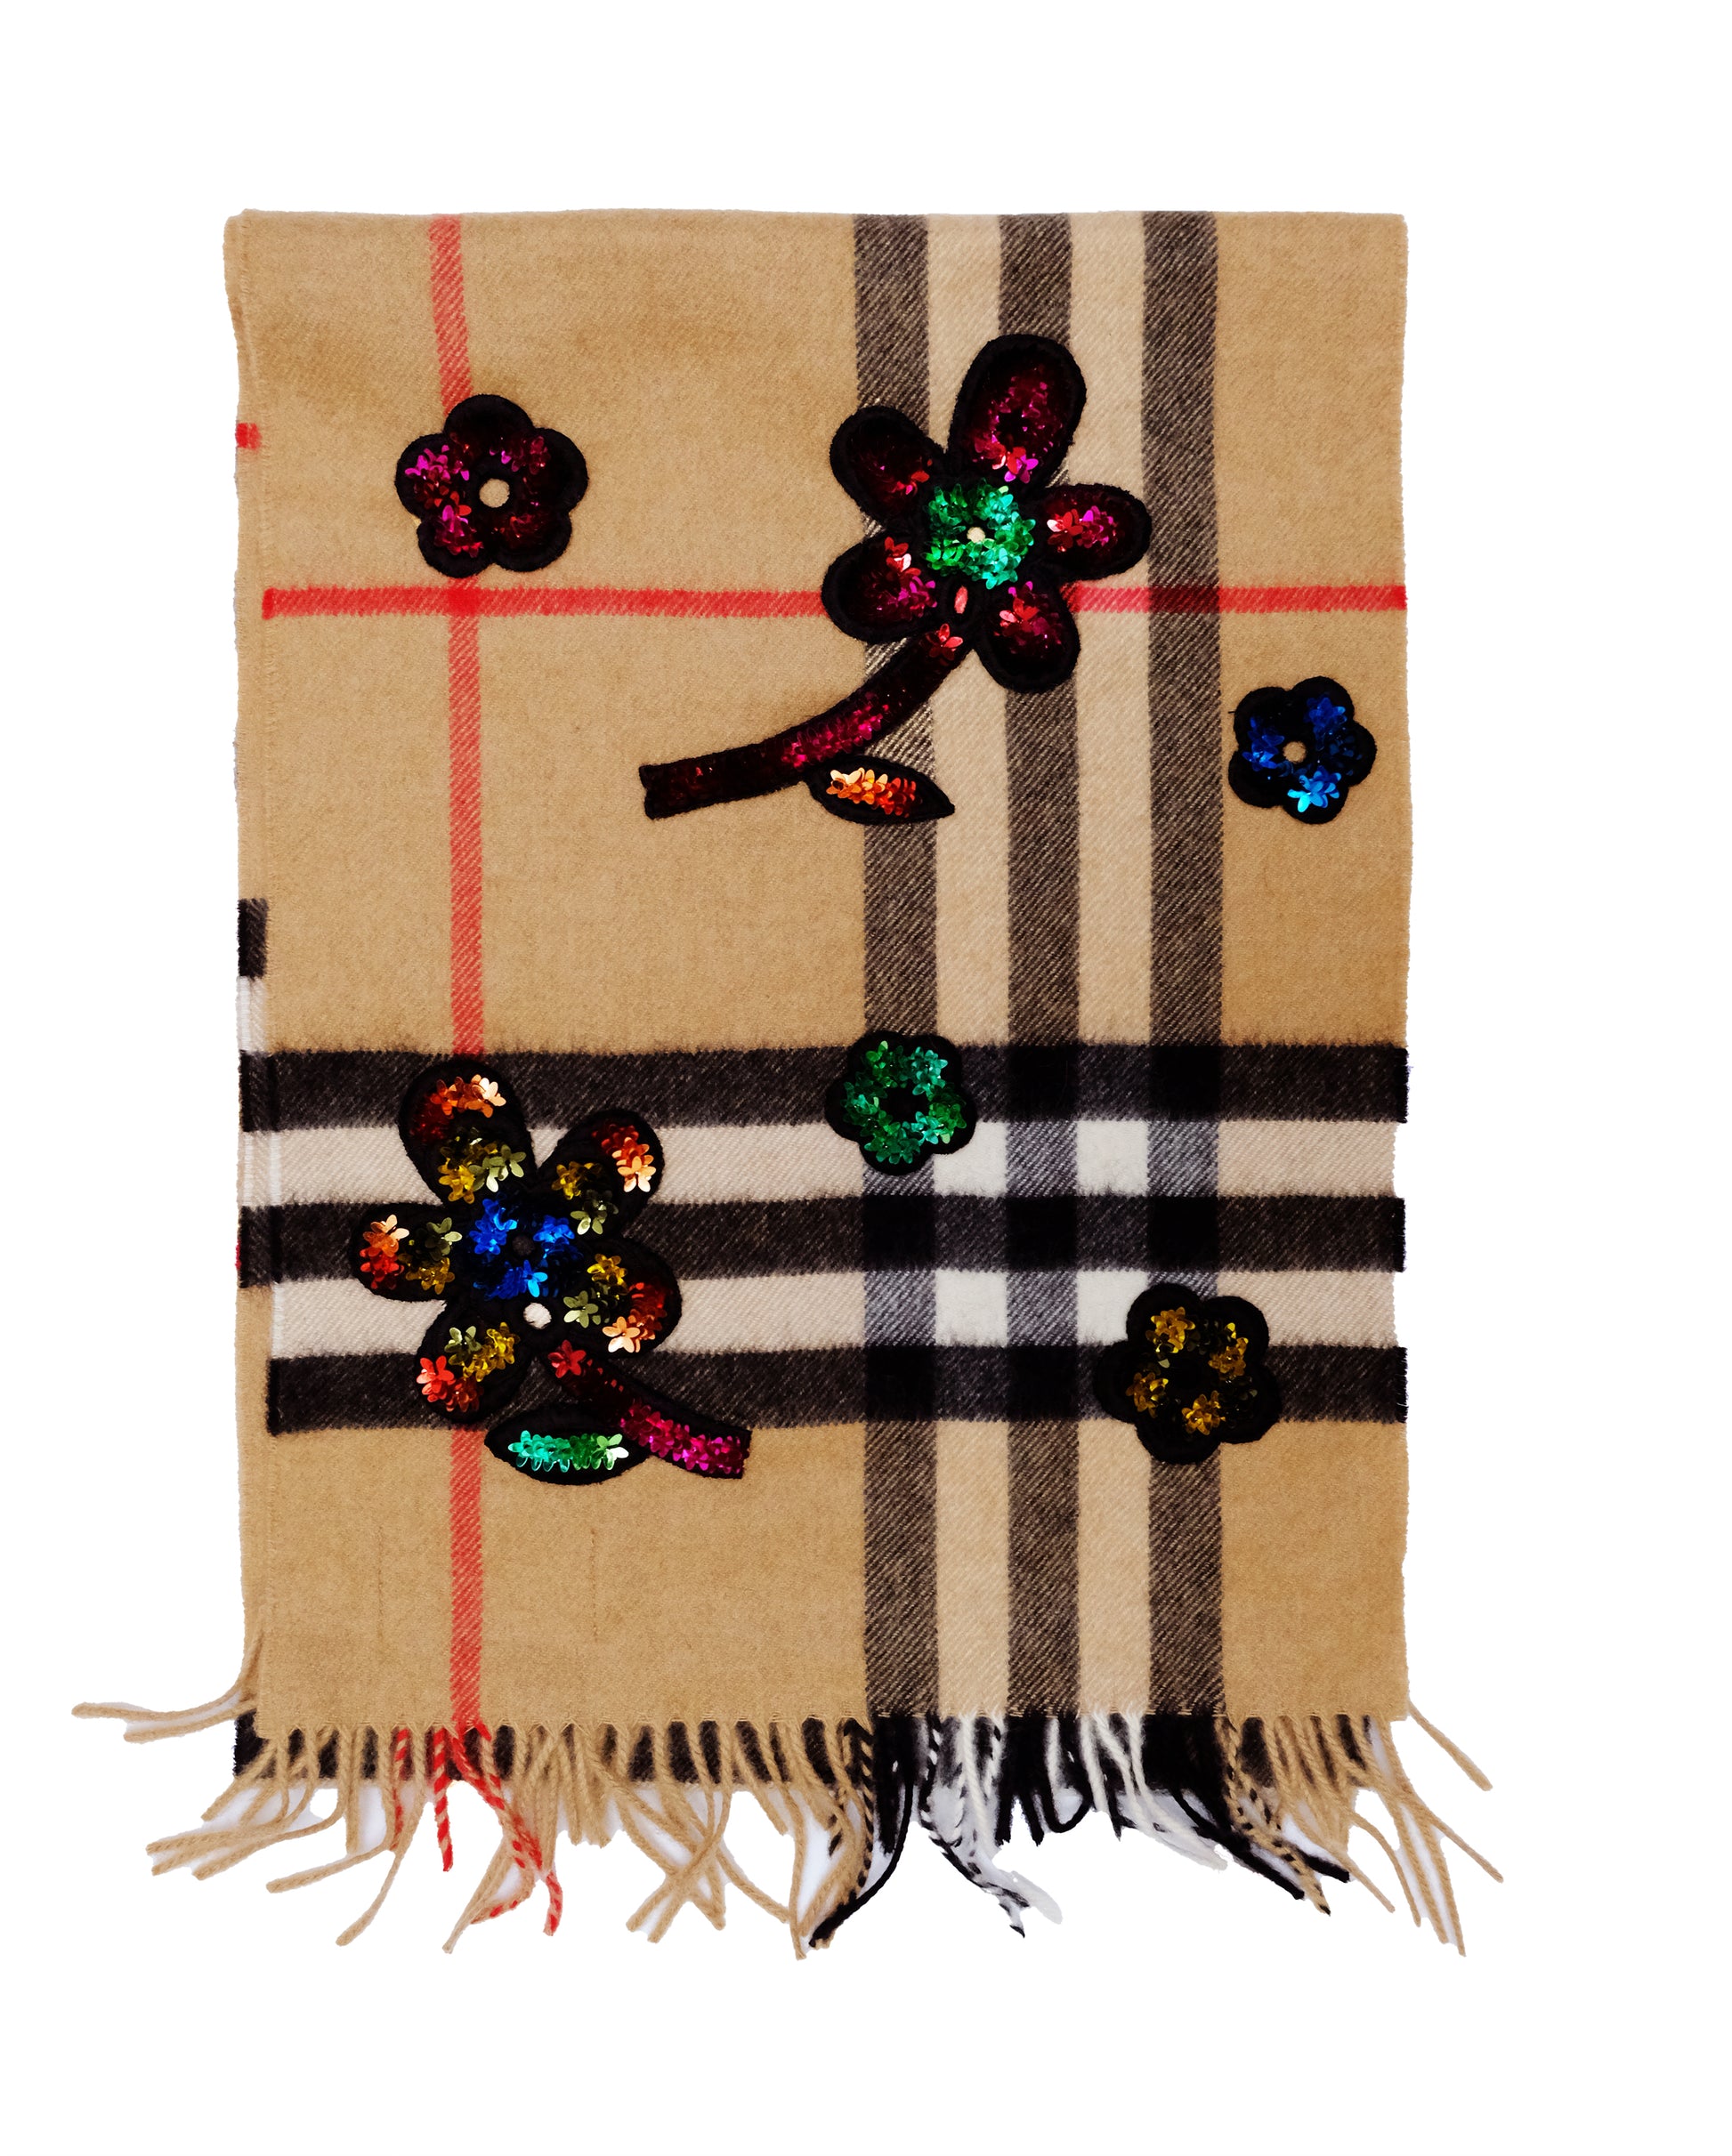 Special Edition Burberry Check Cashmere Scarf with Sequin Flowers